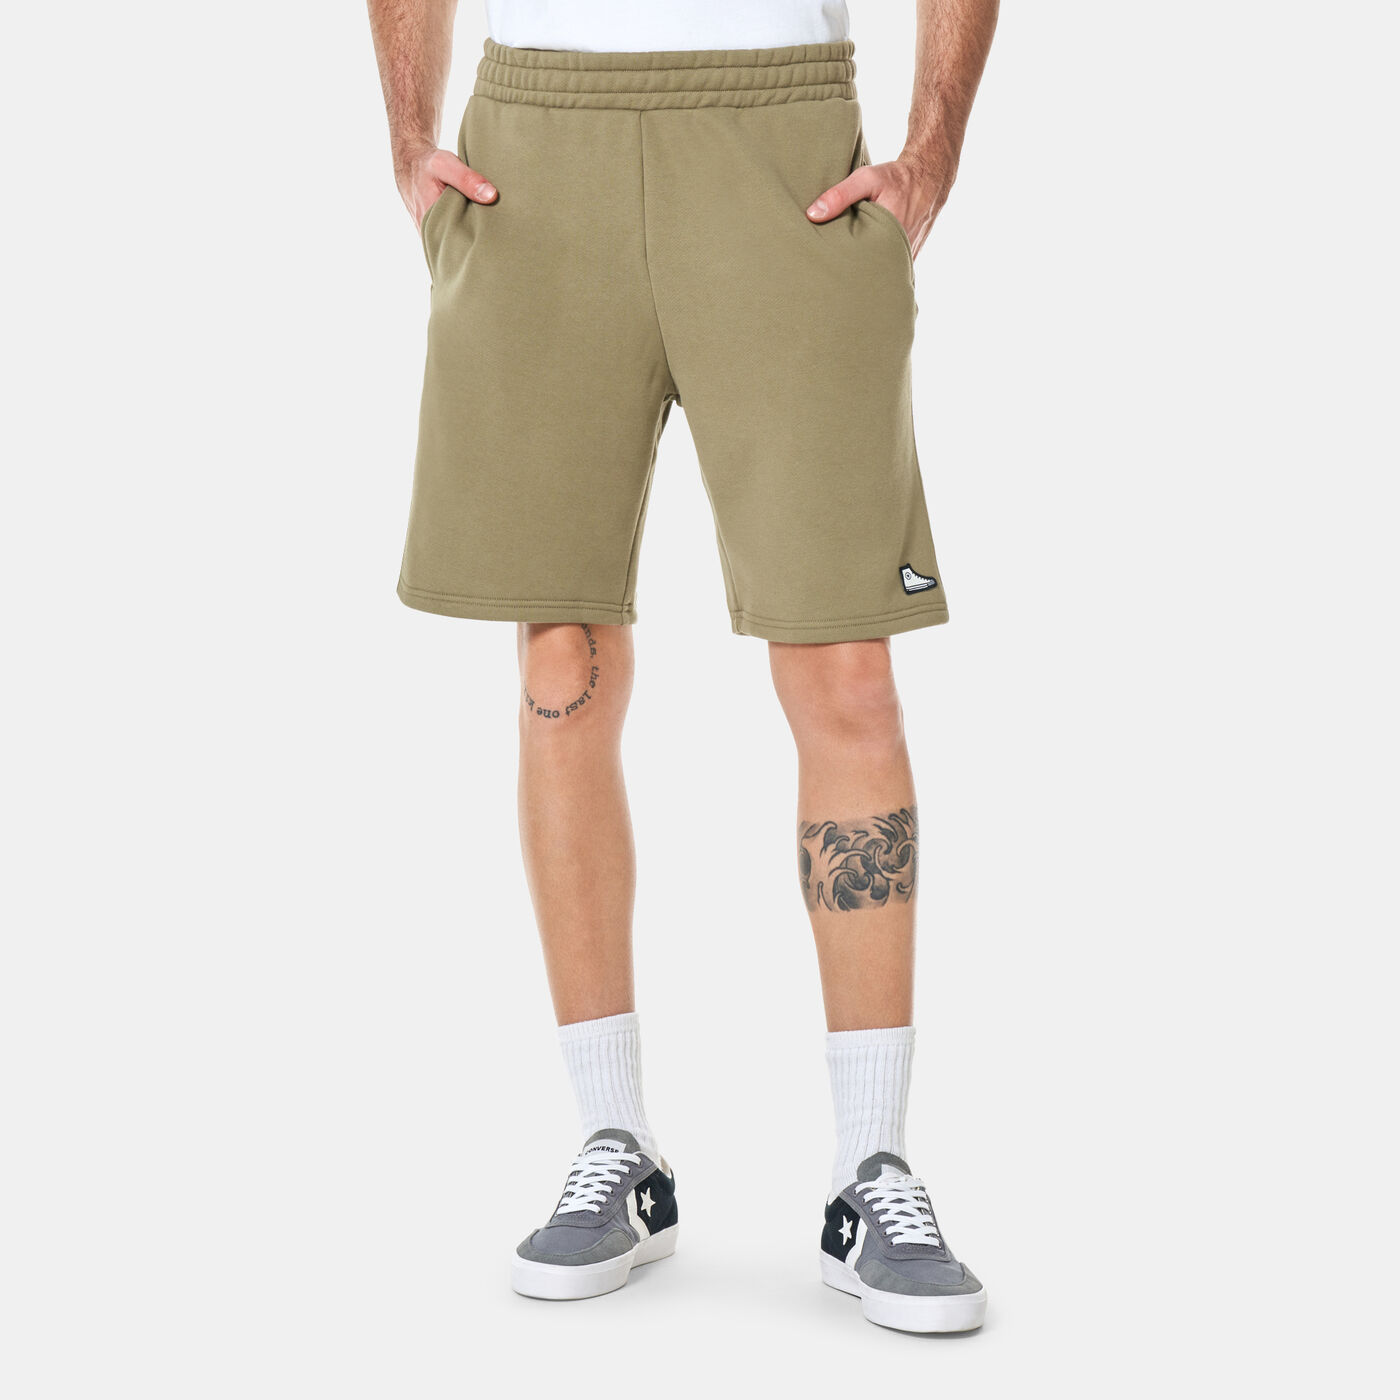 Go-To Sneaker Patch Shorts